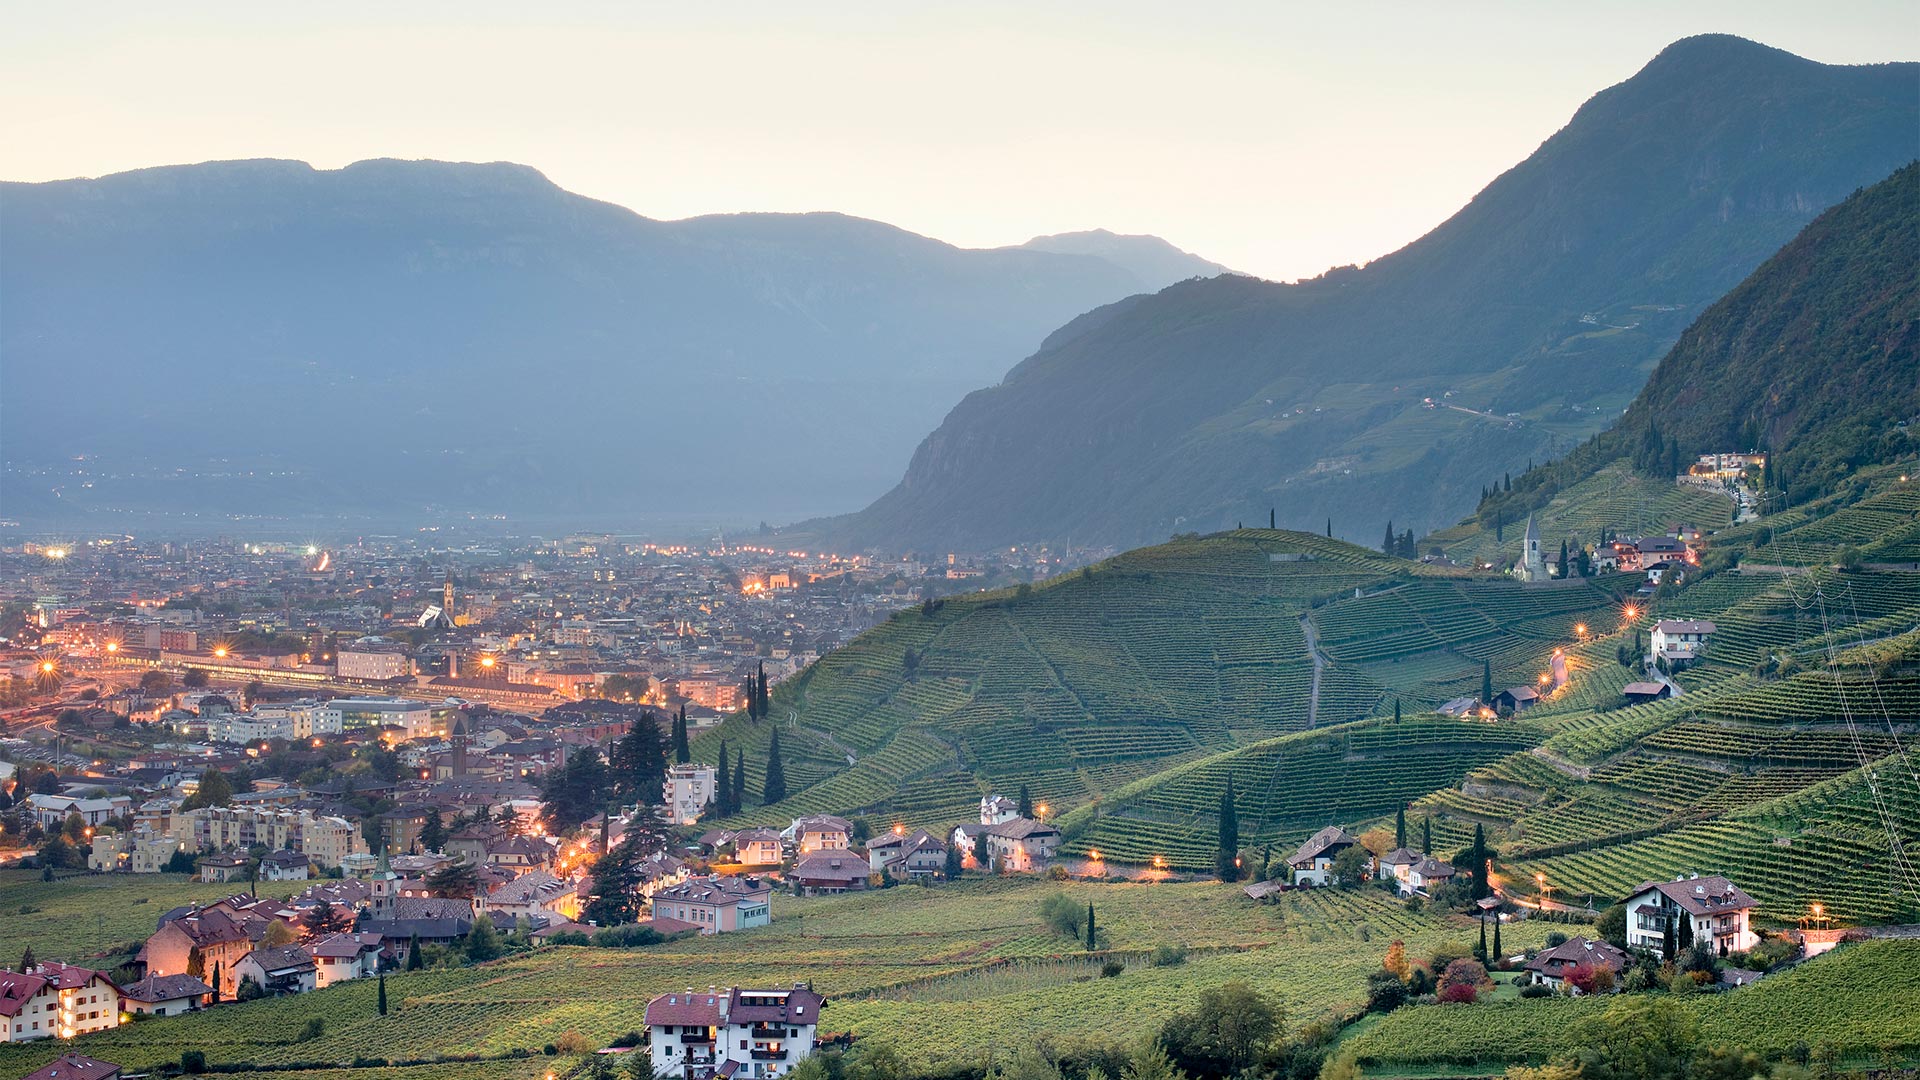 Evening view of Bolzano's vineyards in the foreground and the illuminated city below the mountains in the background.